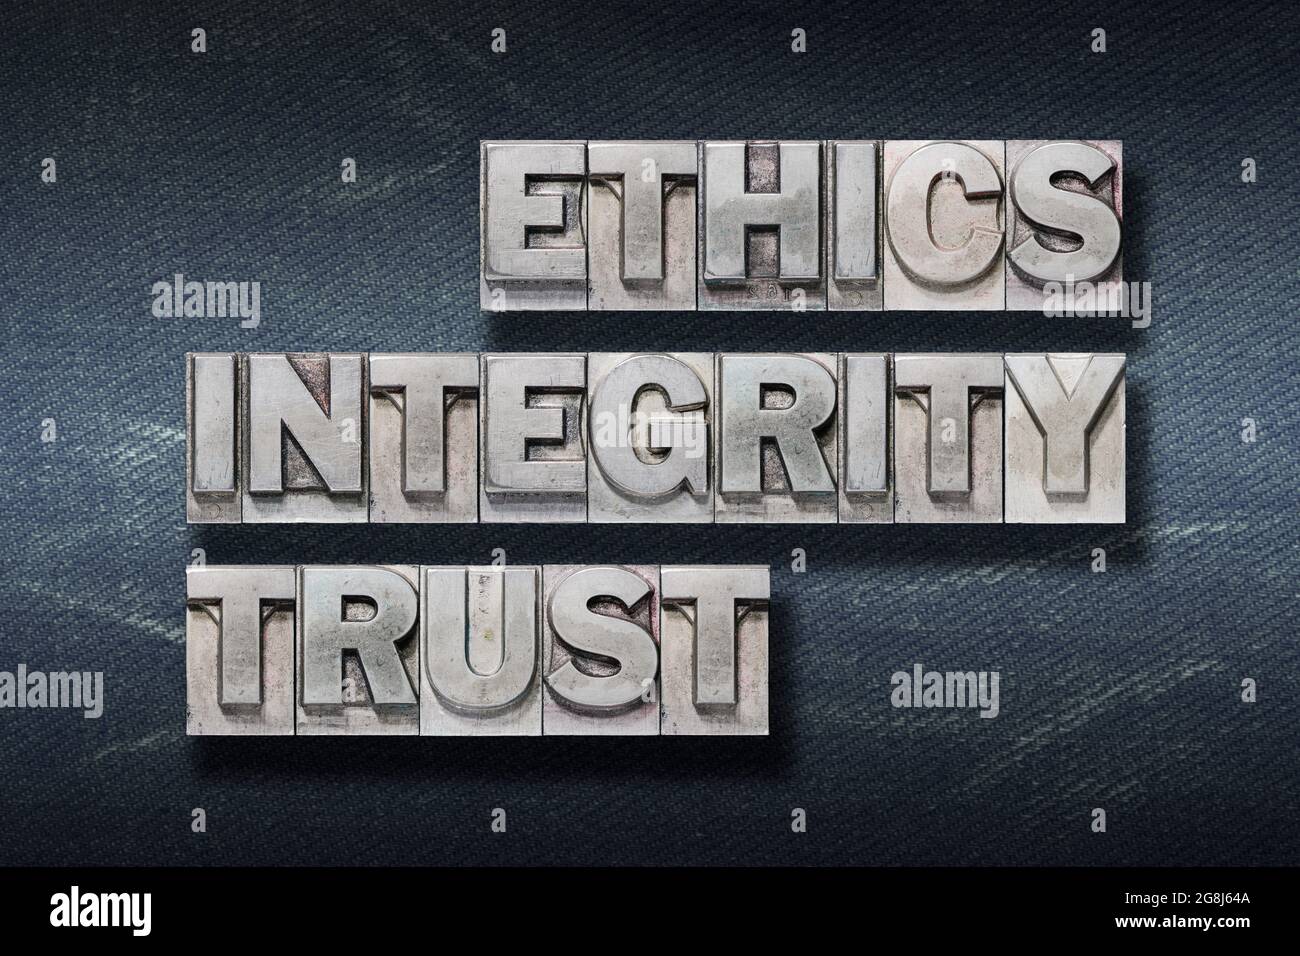 ethics, integrity, trust words made from metallic letterpress on dark jeans background Stock Photo